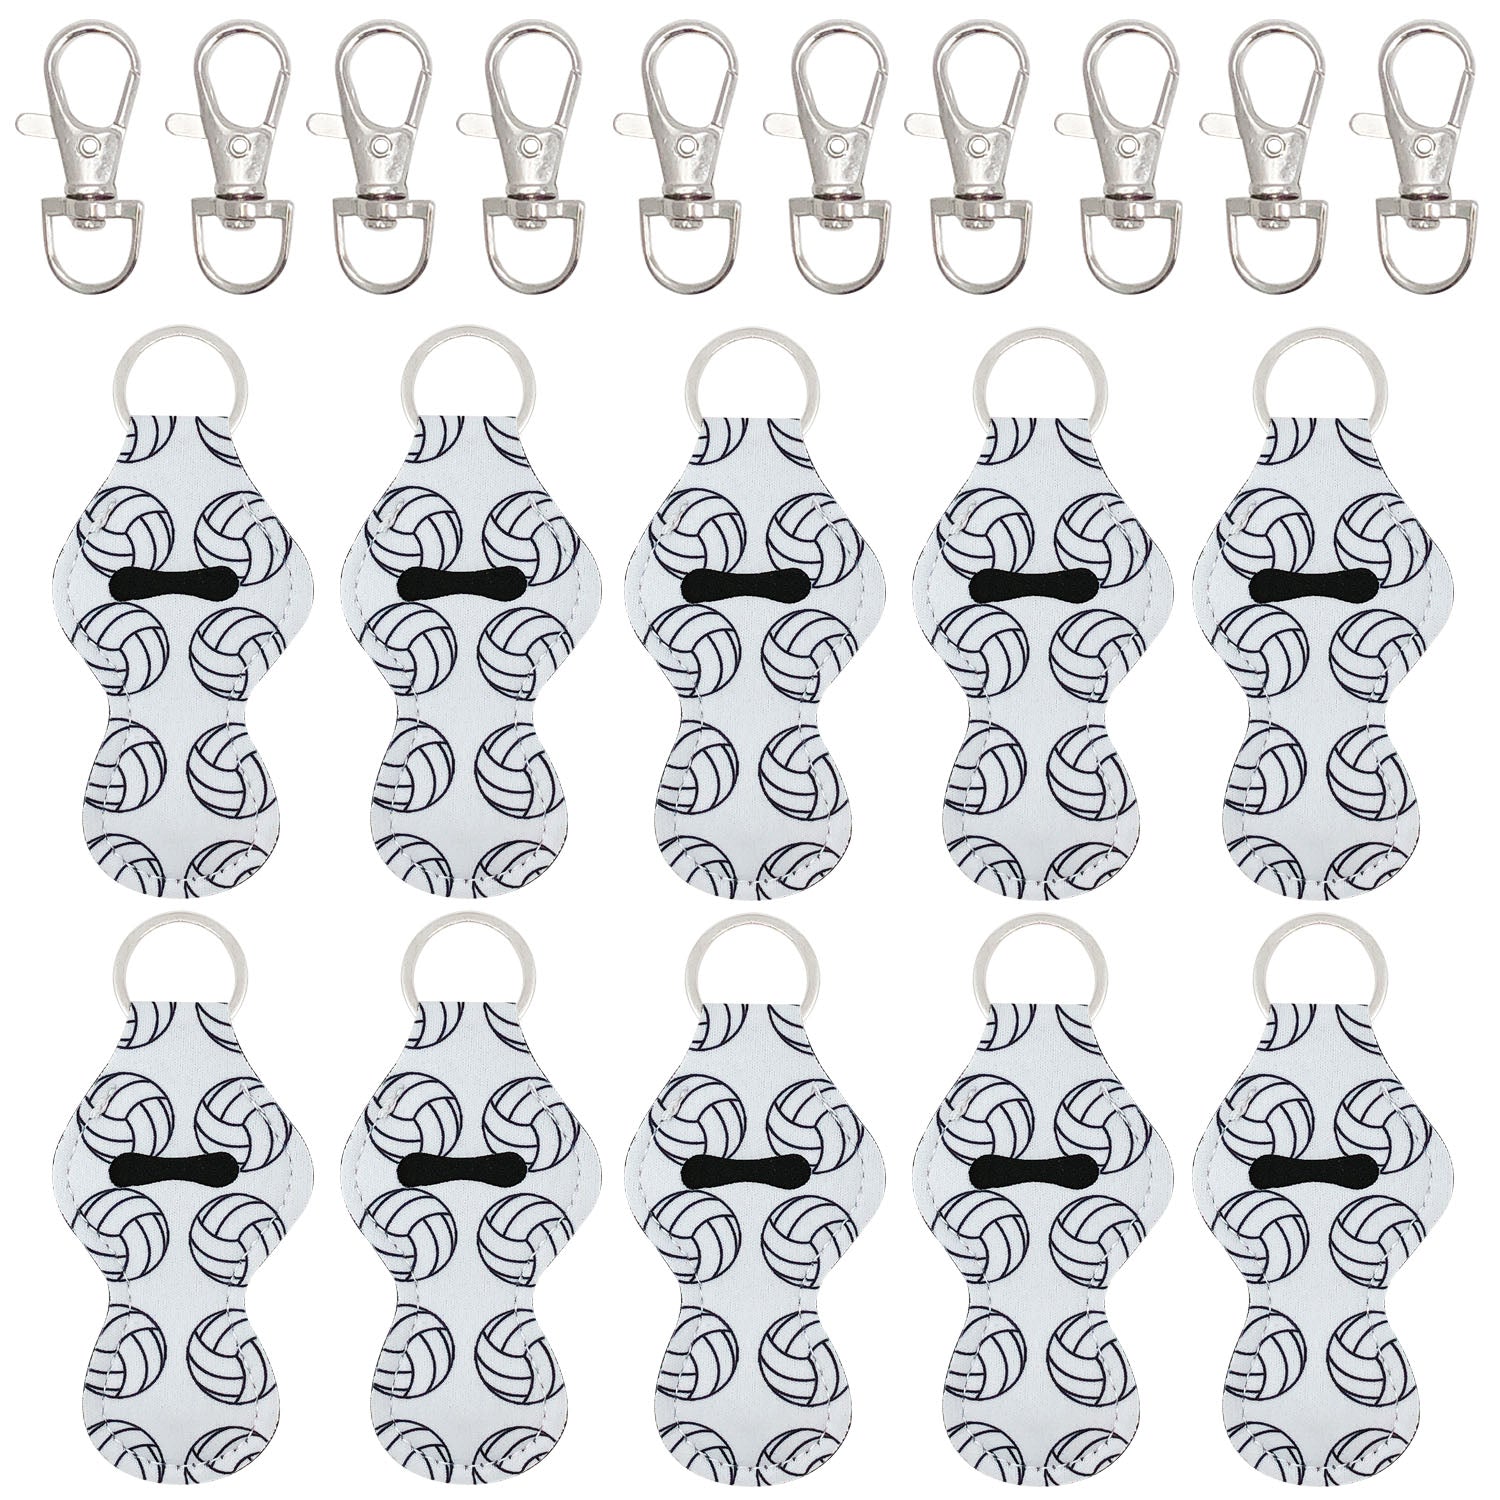 Wrapables 10 Pack Chapstick Holder Keychain with 10 Pieces Metal Clasps